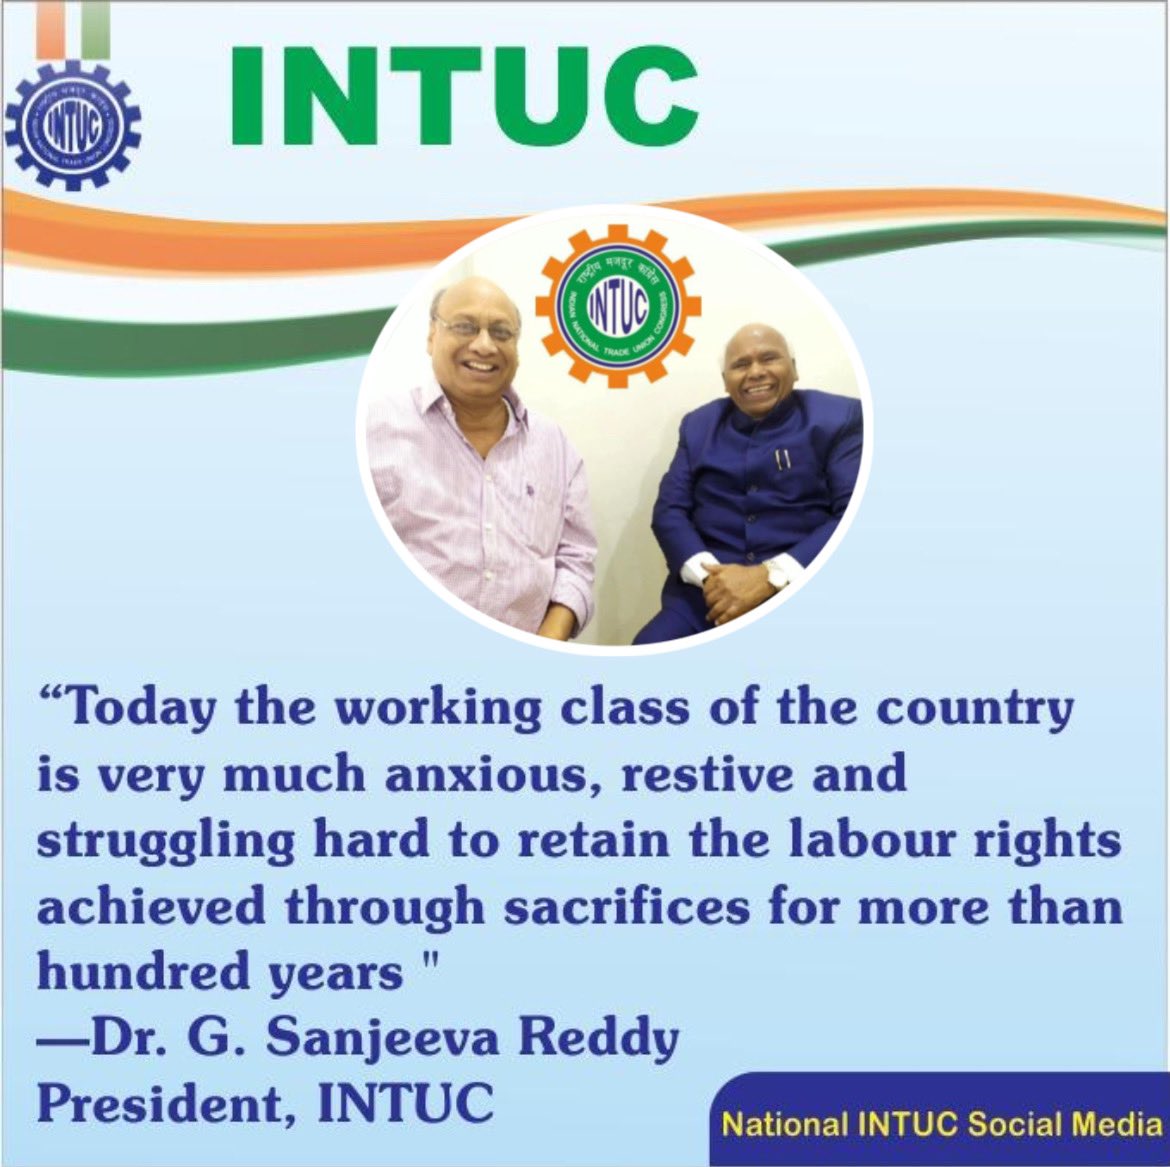 “Today the working class
of the country is very
much anxious, restive
and struggling hard to
retain the labour rights
achieved through
sacrifices for more than
hundred years '
—Dr. G. Sanjeeva Reddy
President, INTUC @INTUCPrez  @INTUCWB @janakbajpai